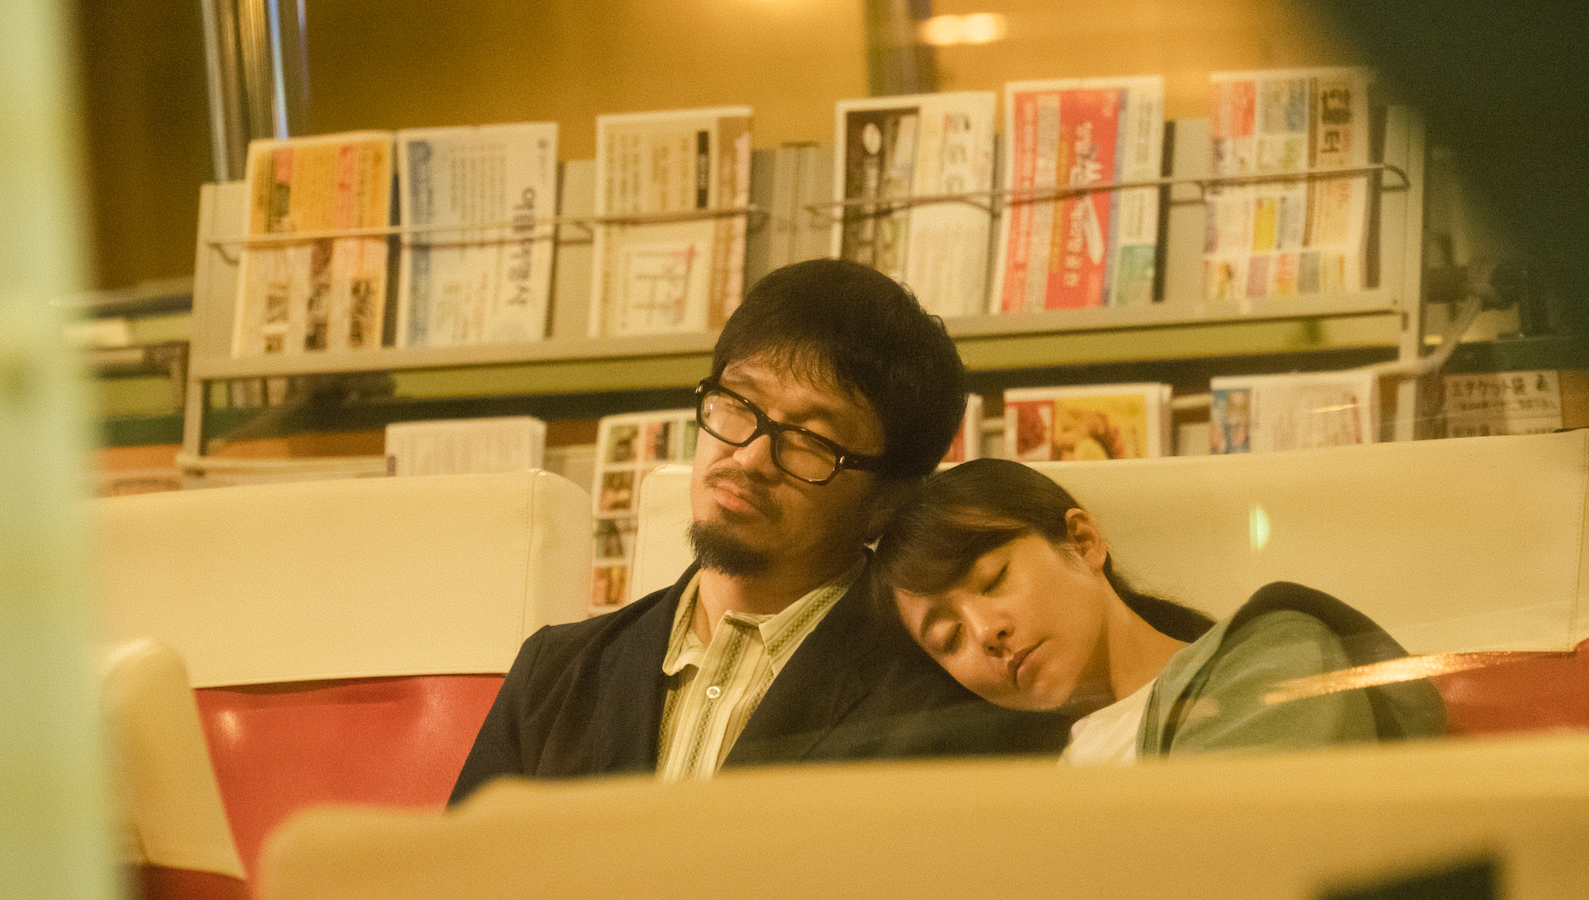 A young woman rests her head on a bespectacled man's shoulder in a bus station